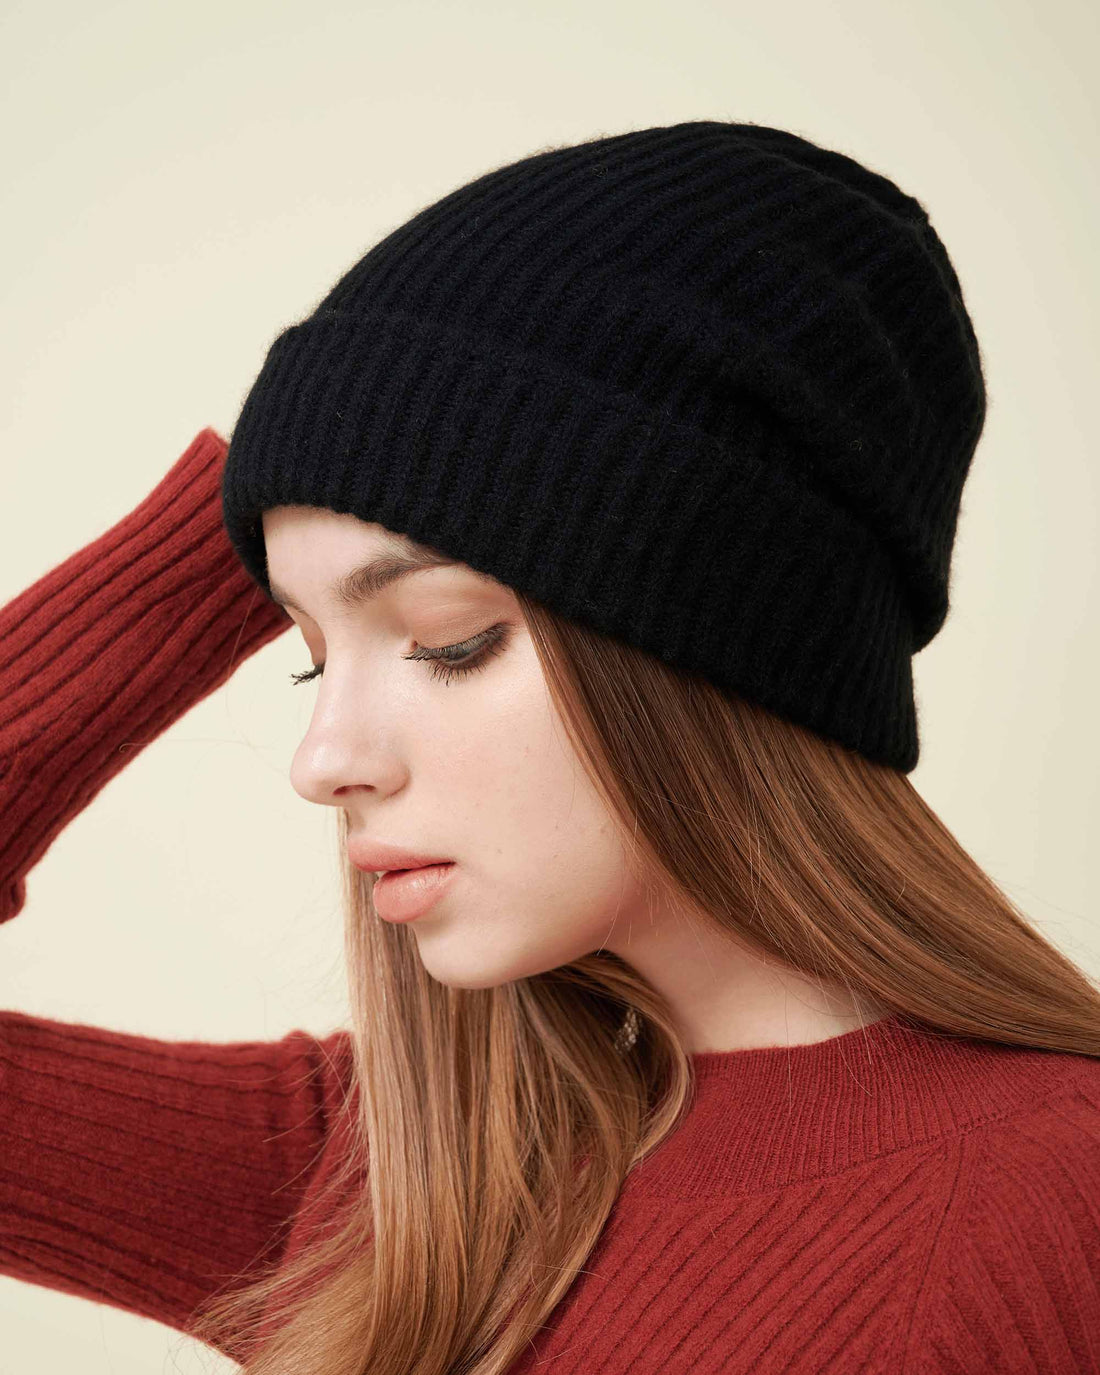 Cashmere Hat , High Quality Hat , 100% Cashmere Hat , Hat For All Seasons , Made By Davinii , Side Image 